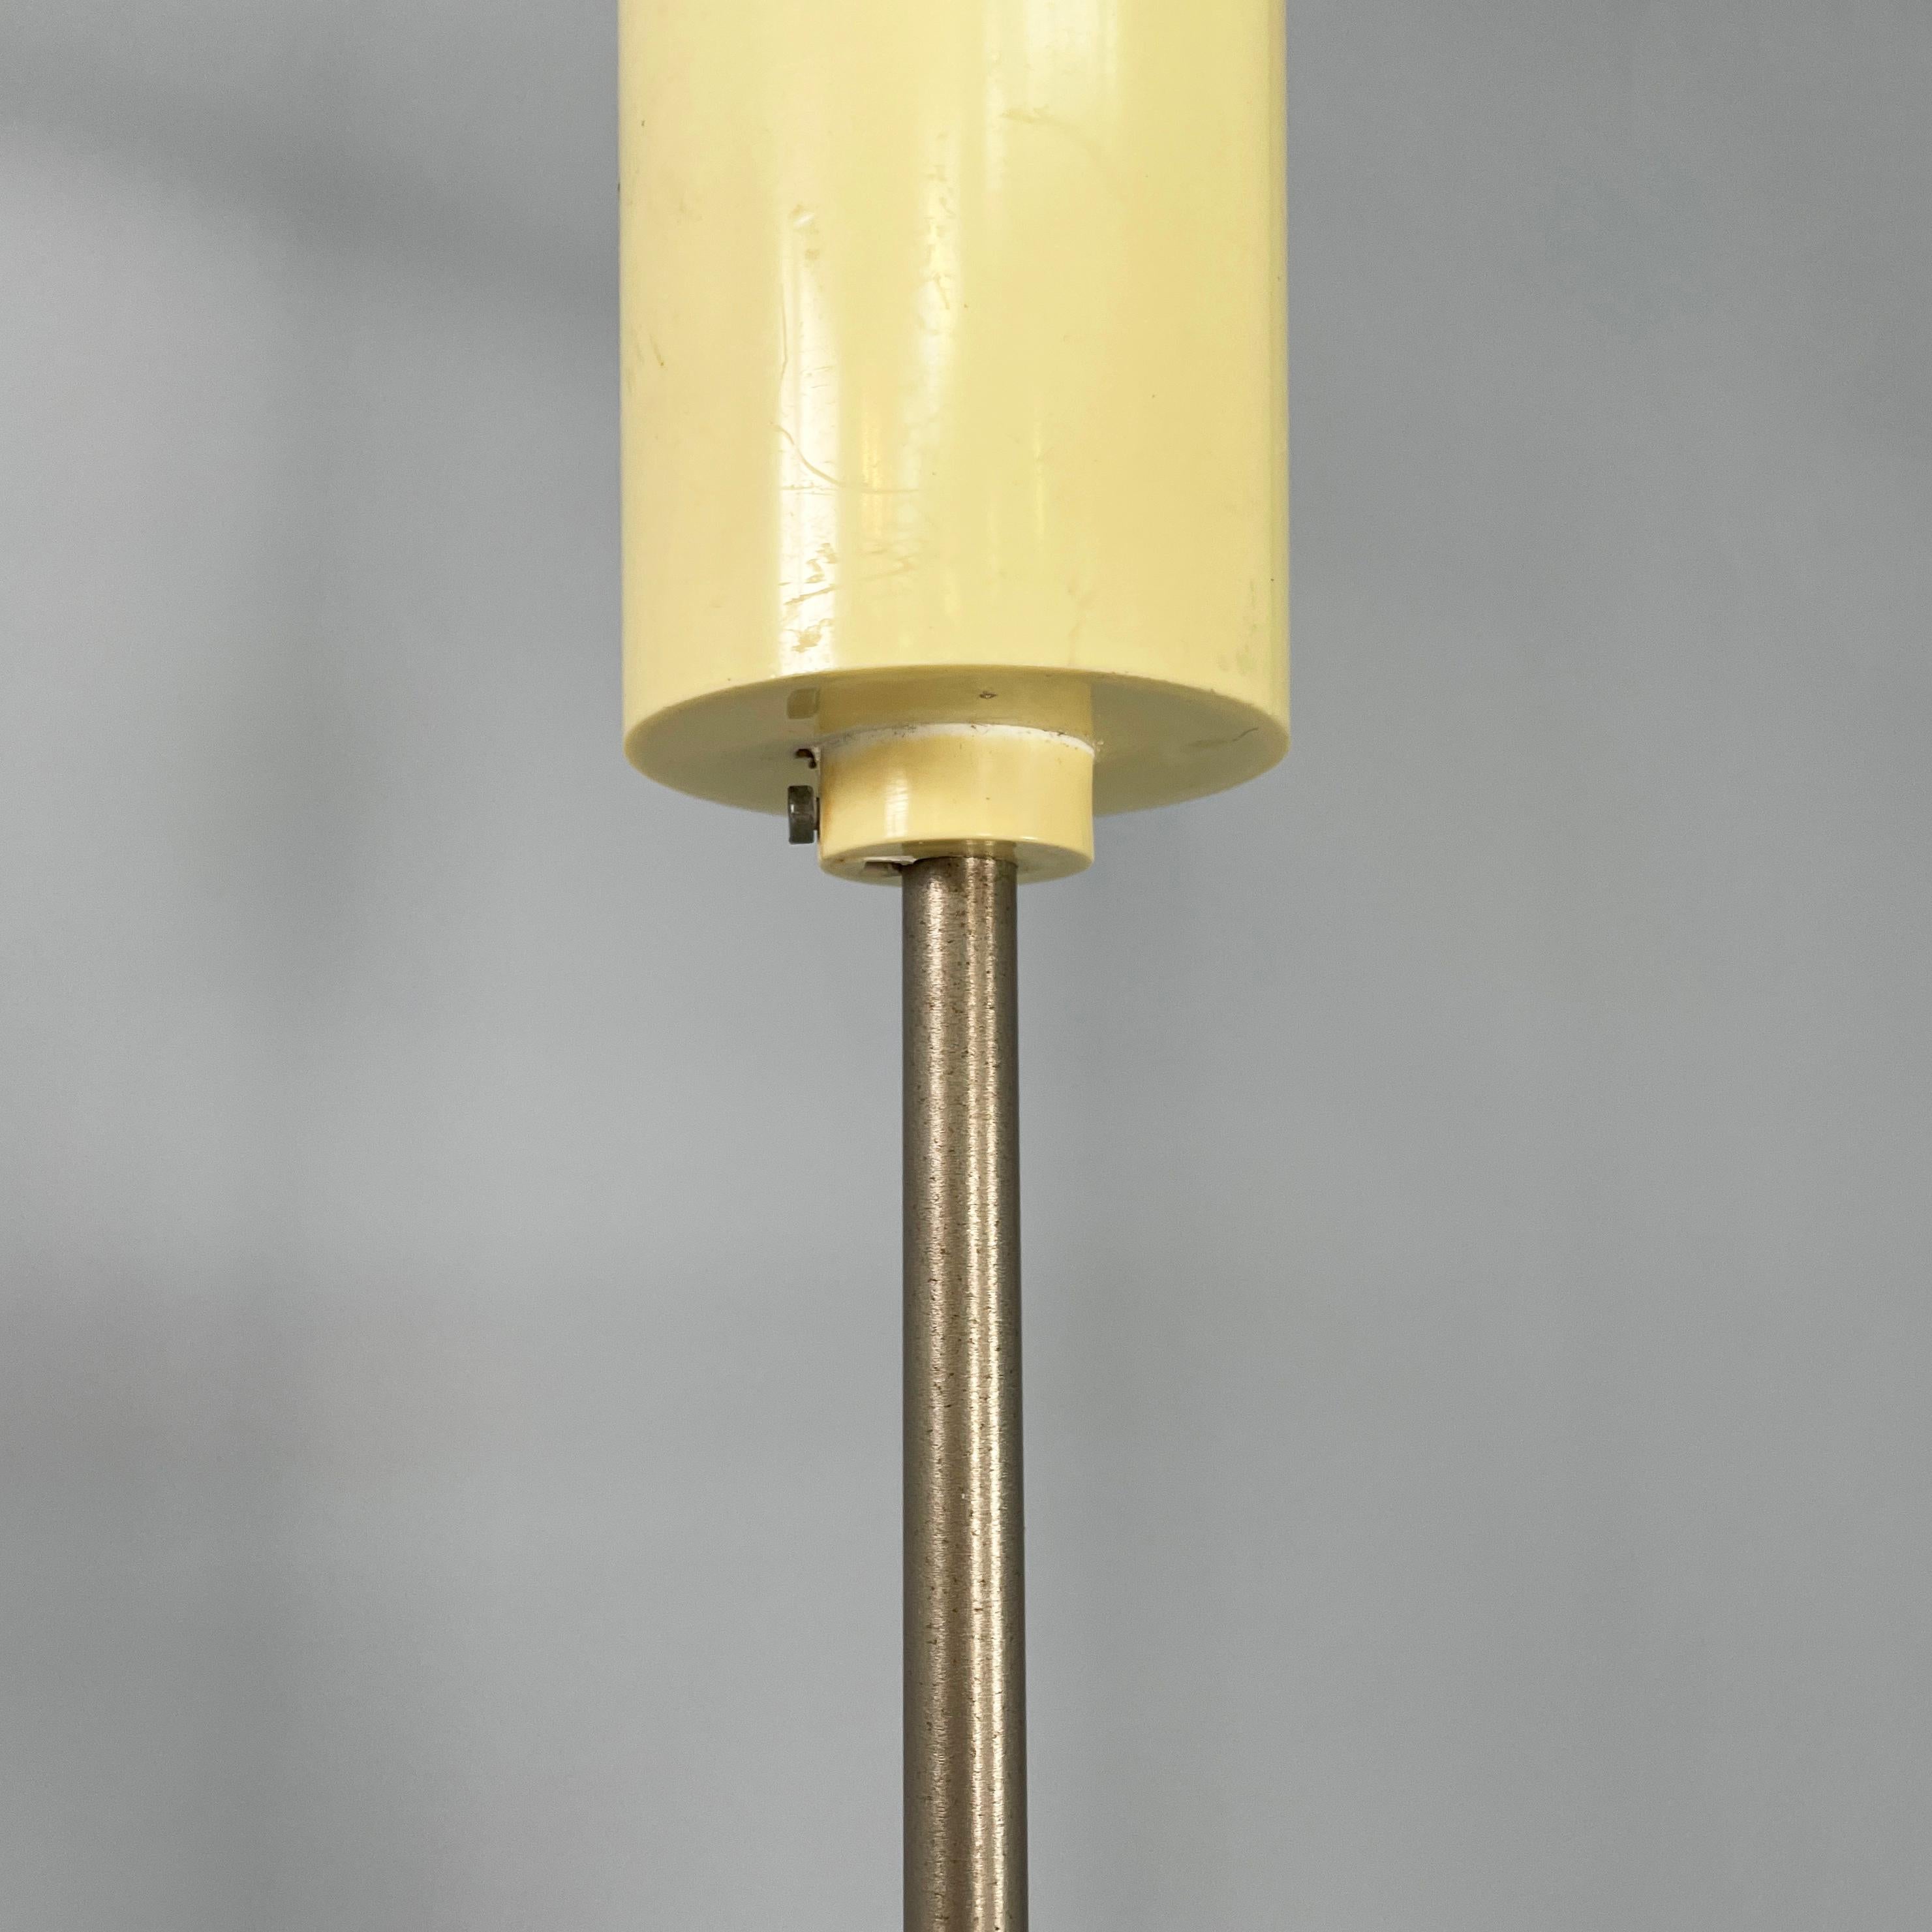 German Bauhaus Chandelier in opaline glass, white plastic and metal, 1920s For Sale 10